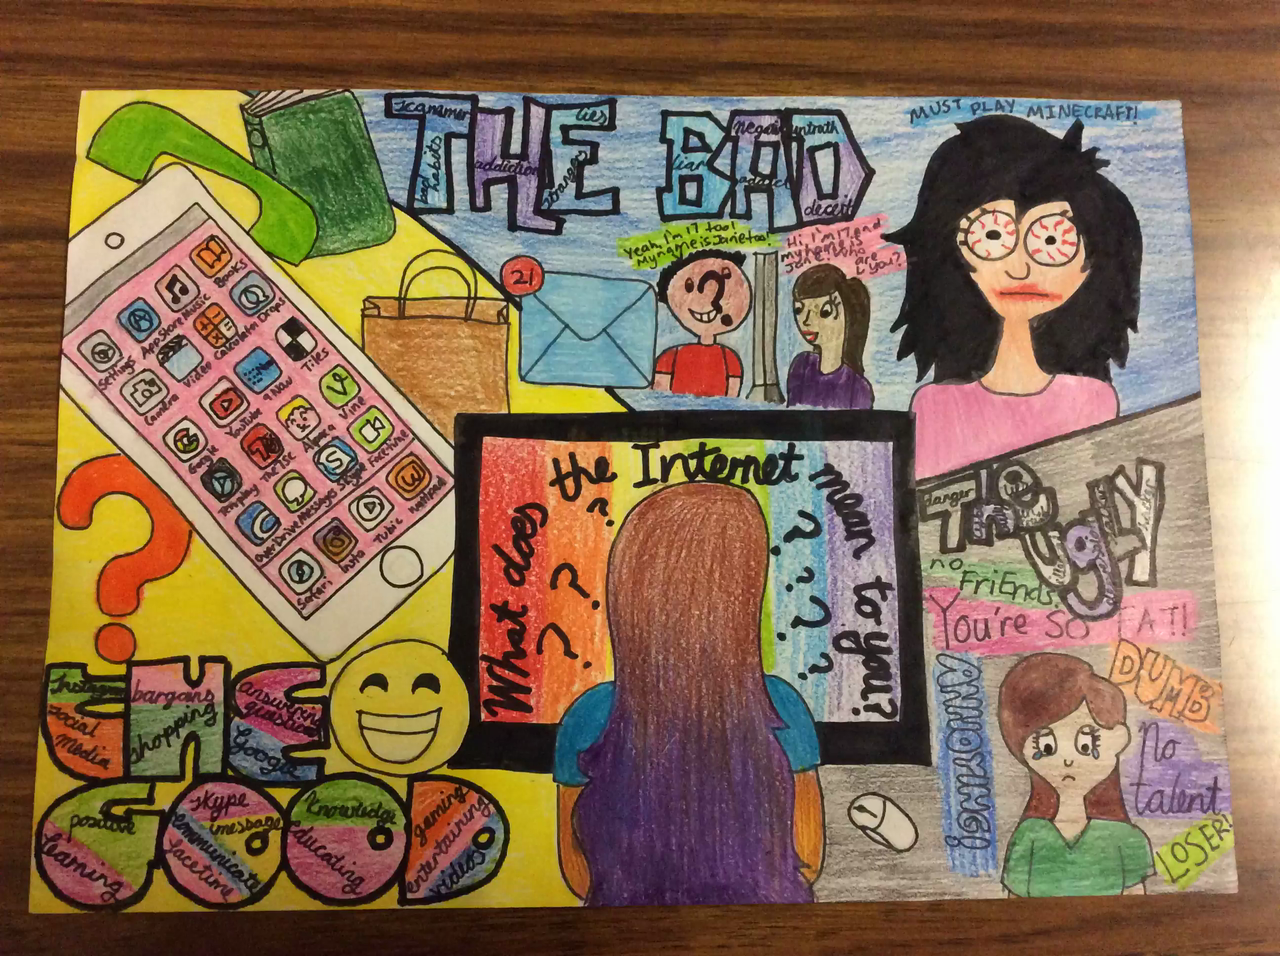 Kids poster competition: Win $$ - Theme "MAKE THE INTERNET A SAFER